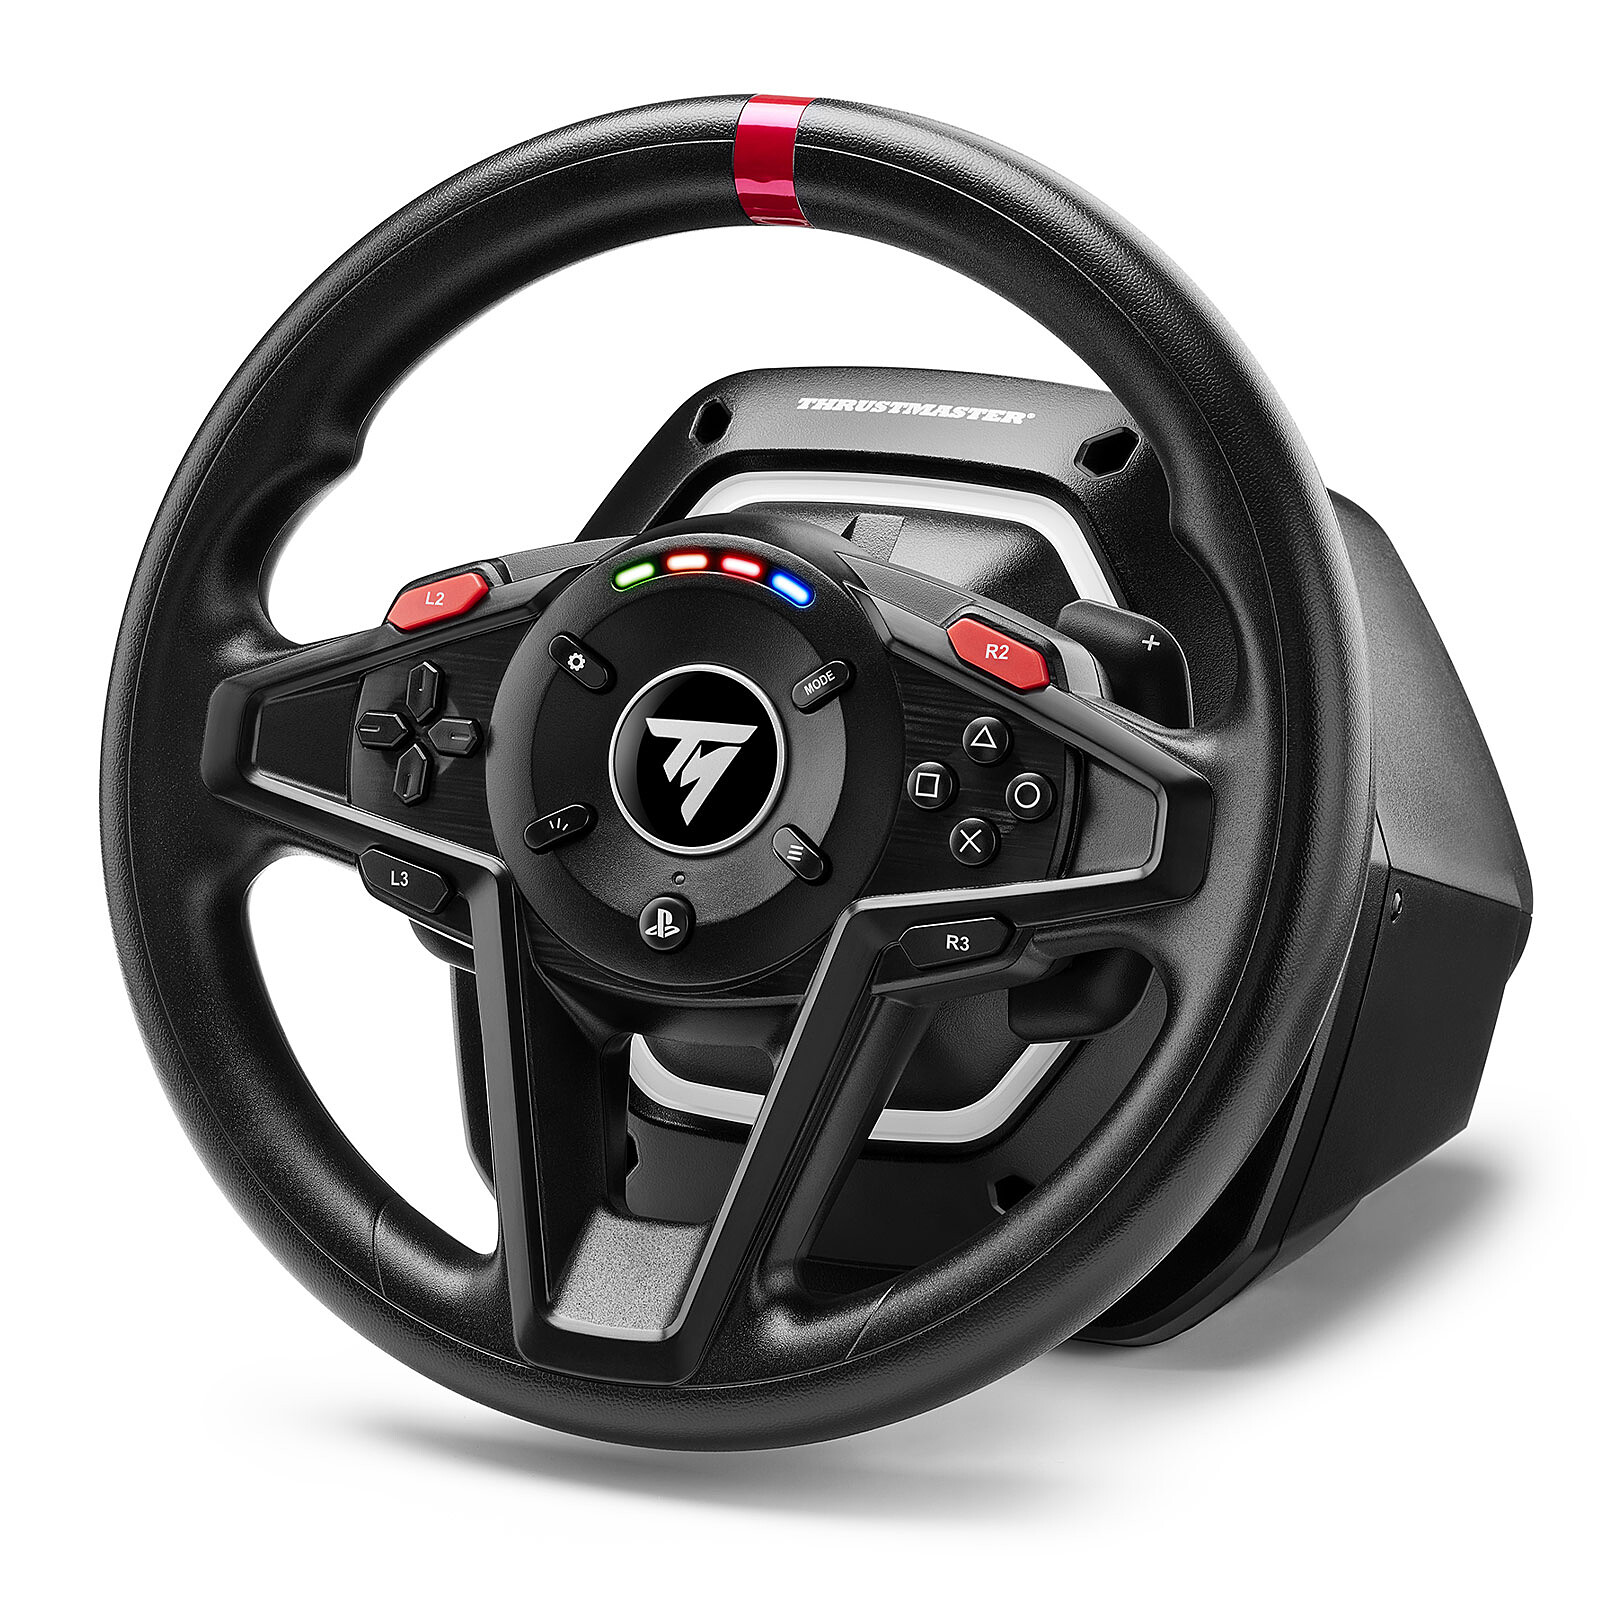 RIP G29❓ Thrustmaster T128 is the new king in value for money 💵 